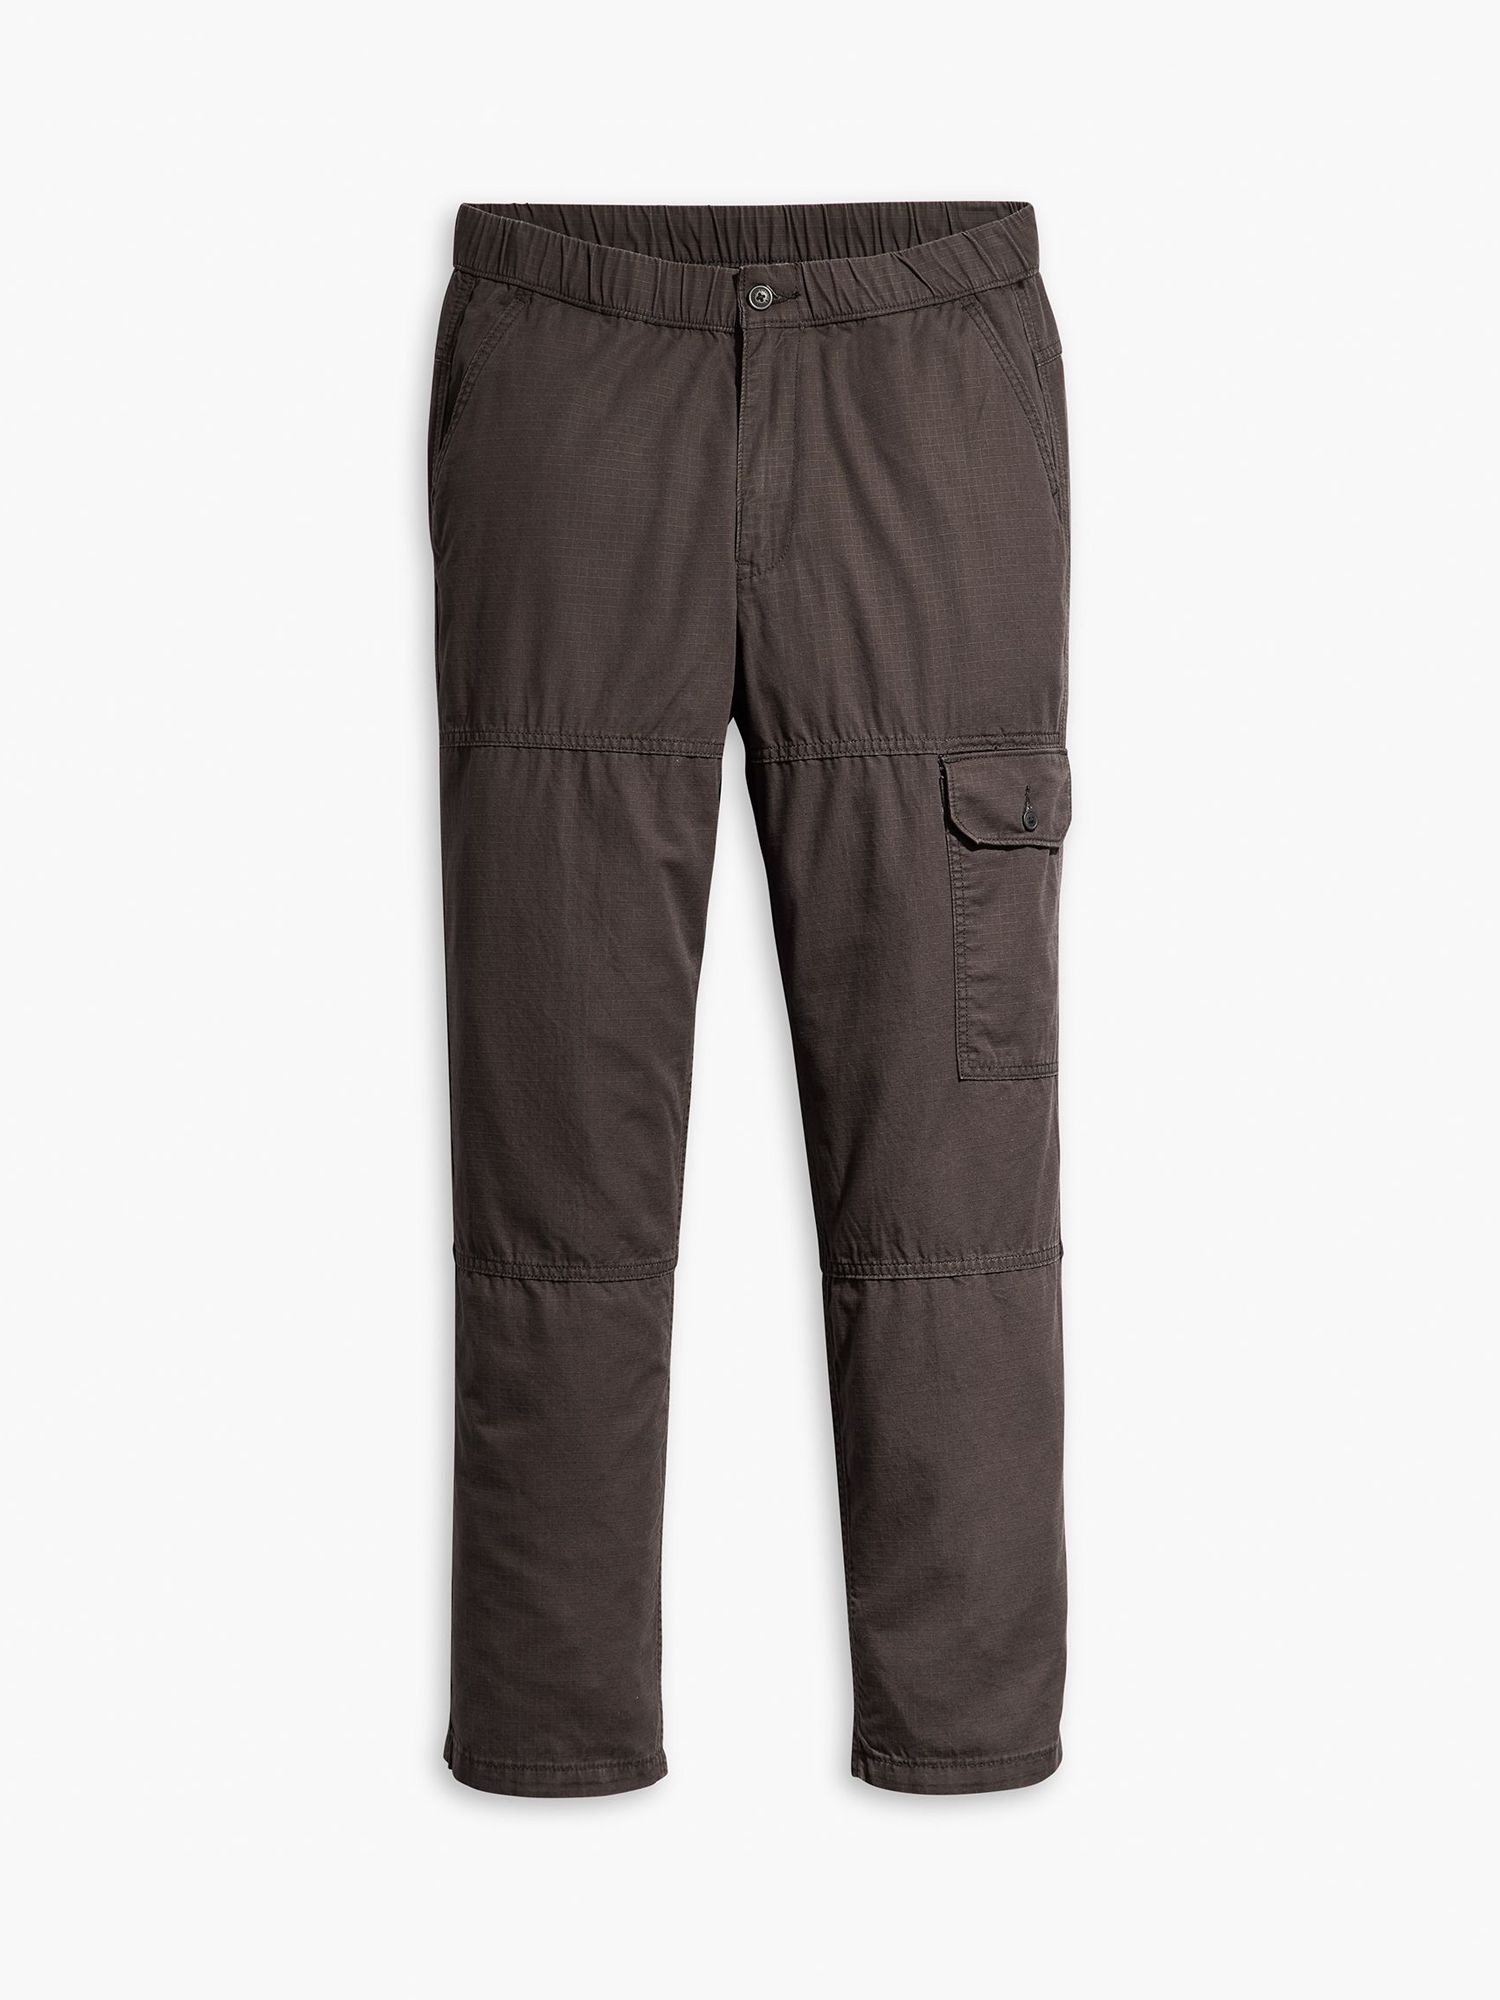 Levi's Patch Pocket Cargo Trousers, Black at John Lewis & Partners